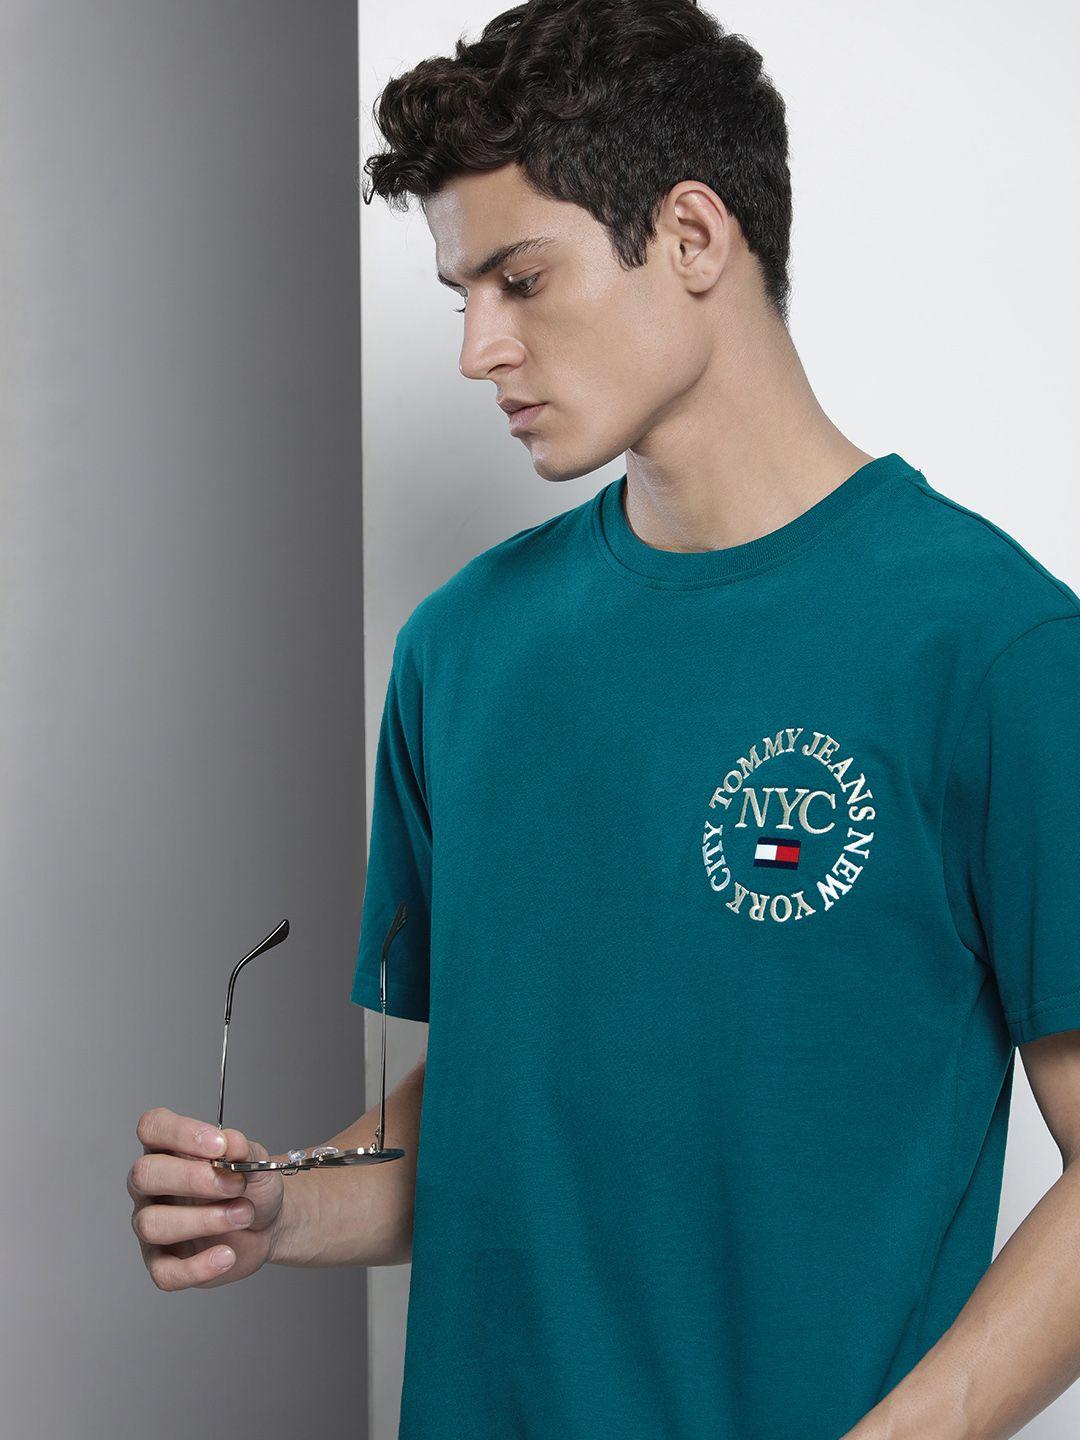 tommy hilfiger men teal blue embroidered pure cotton t-shirt